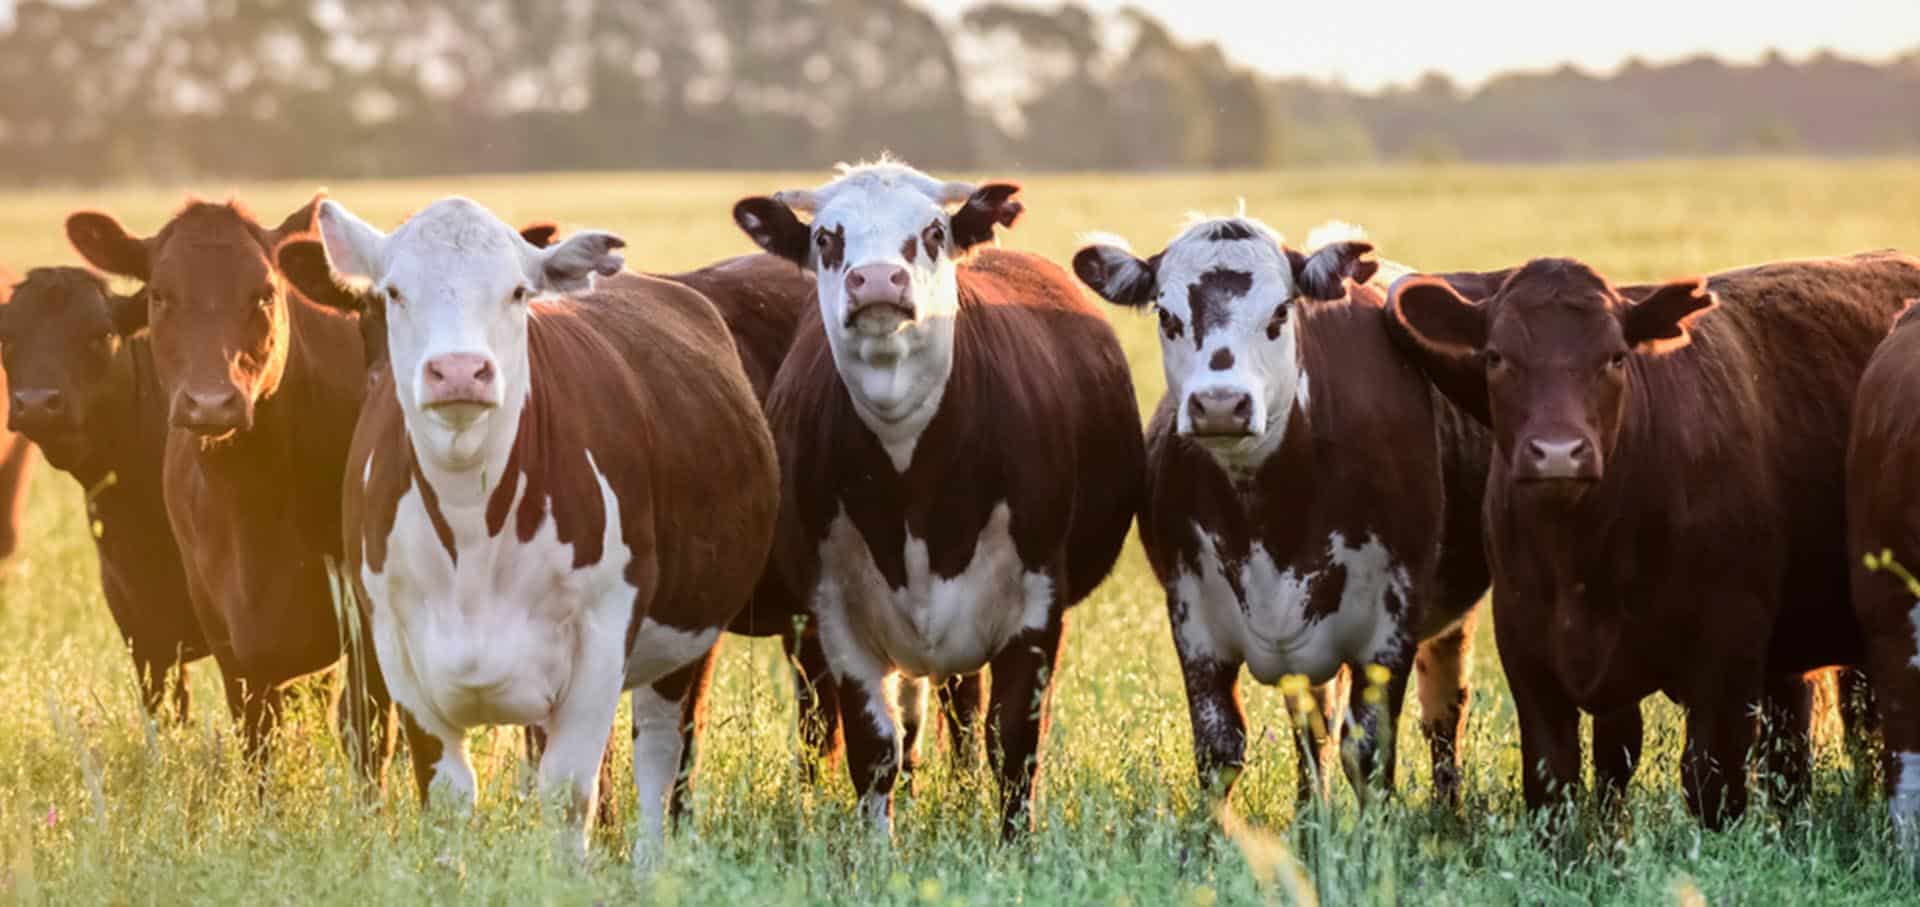 Group of cows on a grass field — Best Veterinary Services in Bundaberg, QLD